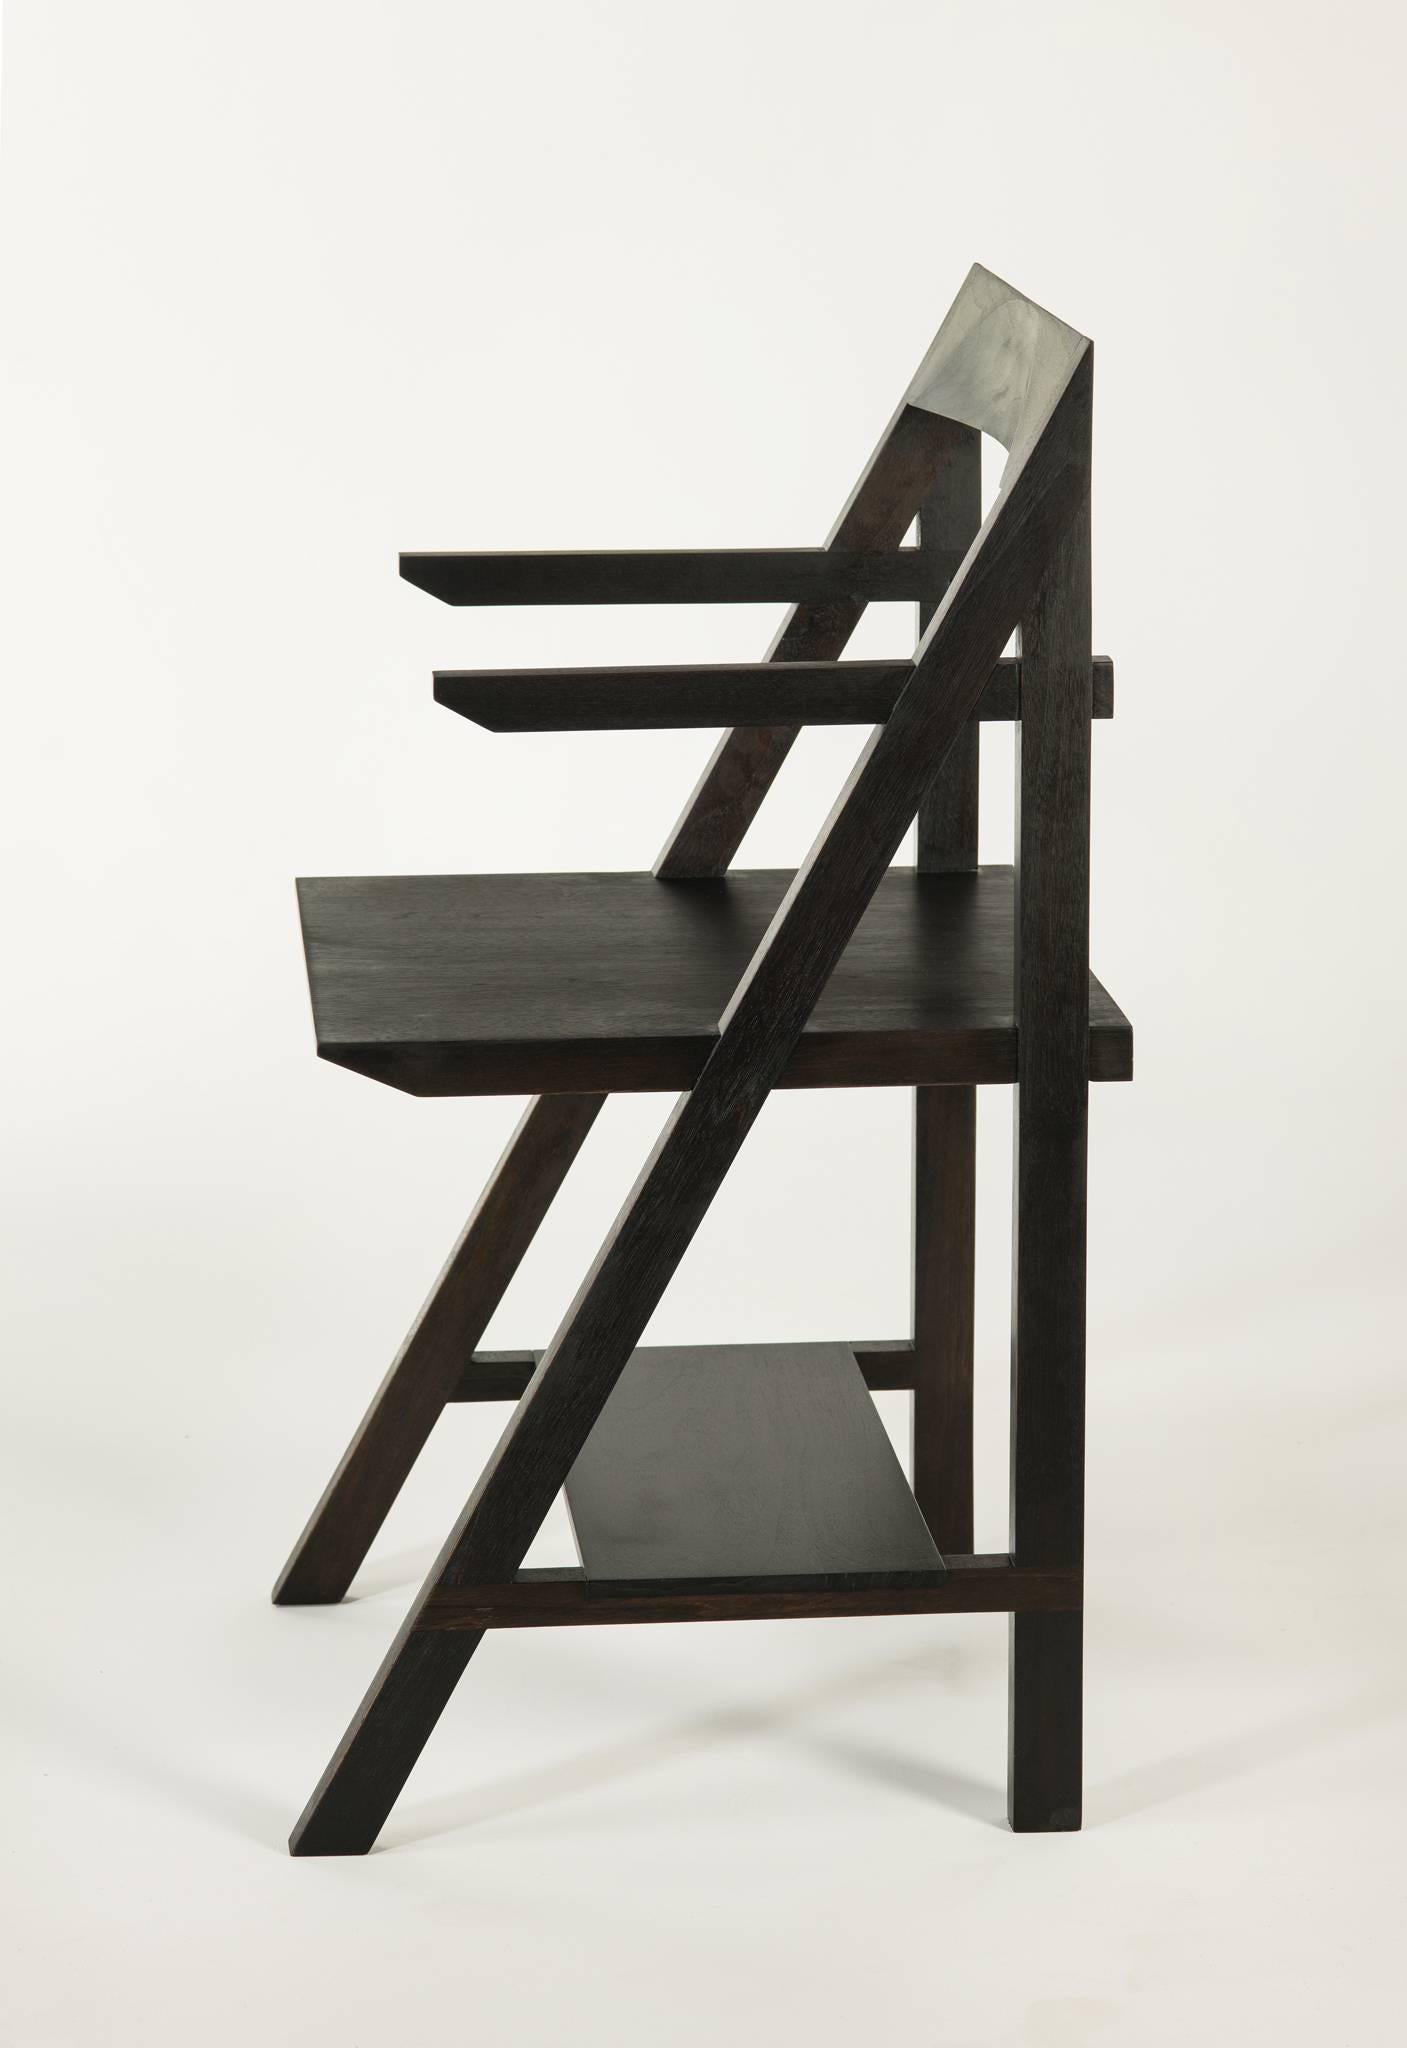 The Cantilever armchair is inspired by Classic Bauhaus design.

The Cantilever armchair is a simplified form that blends rationality with functionality.

Originally envisioned as an entryway piece, the shelf below provides a practical means of